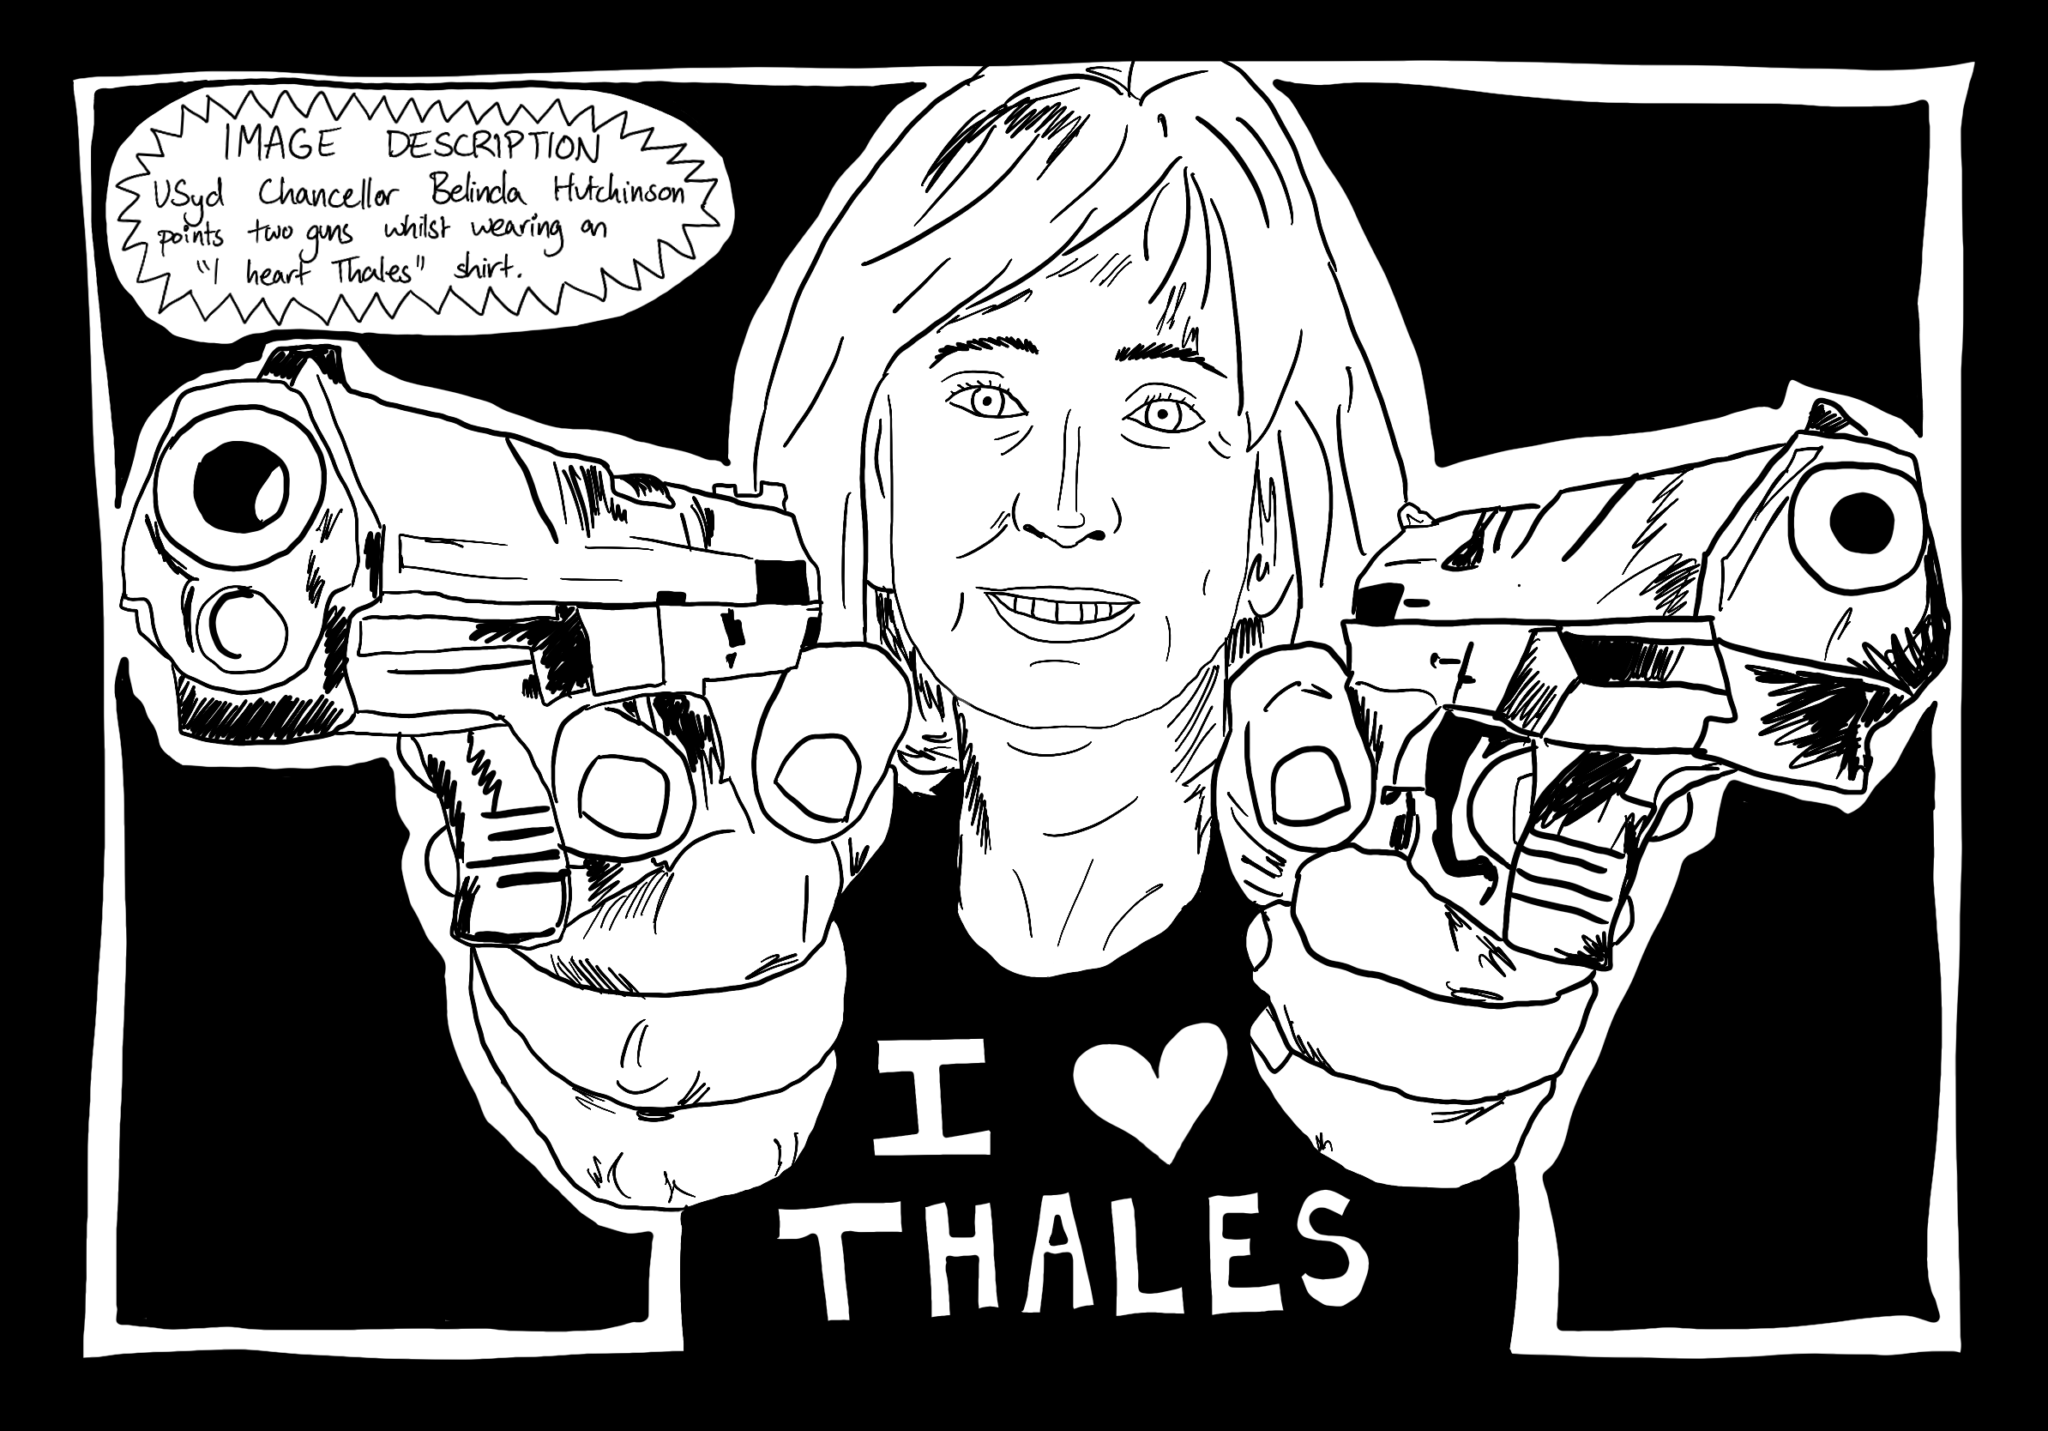 USyd Chancellor Belinda Hutchinson points two guns whilst wearing an "I heart Thales" shirt.